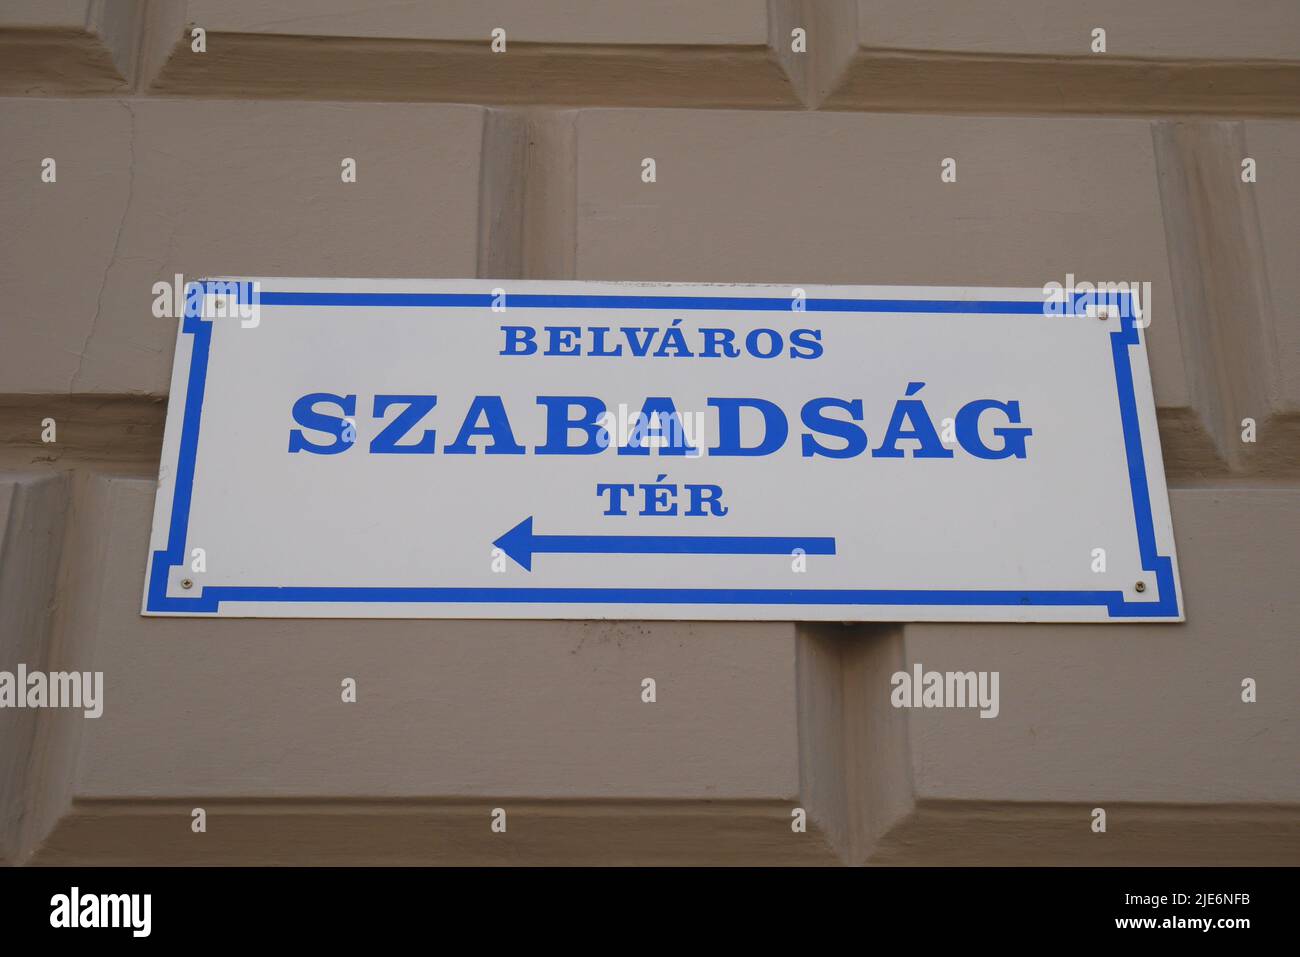 Road sign pointing to Szabadsag ter, Szabadsag Square, Kecskemet, Hungary Stock Photo